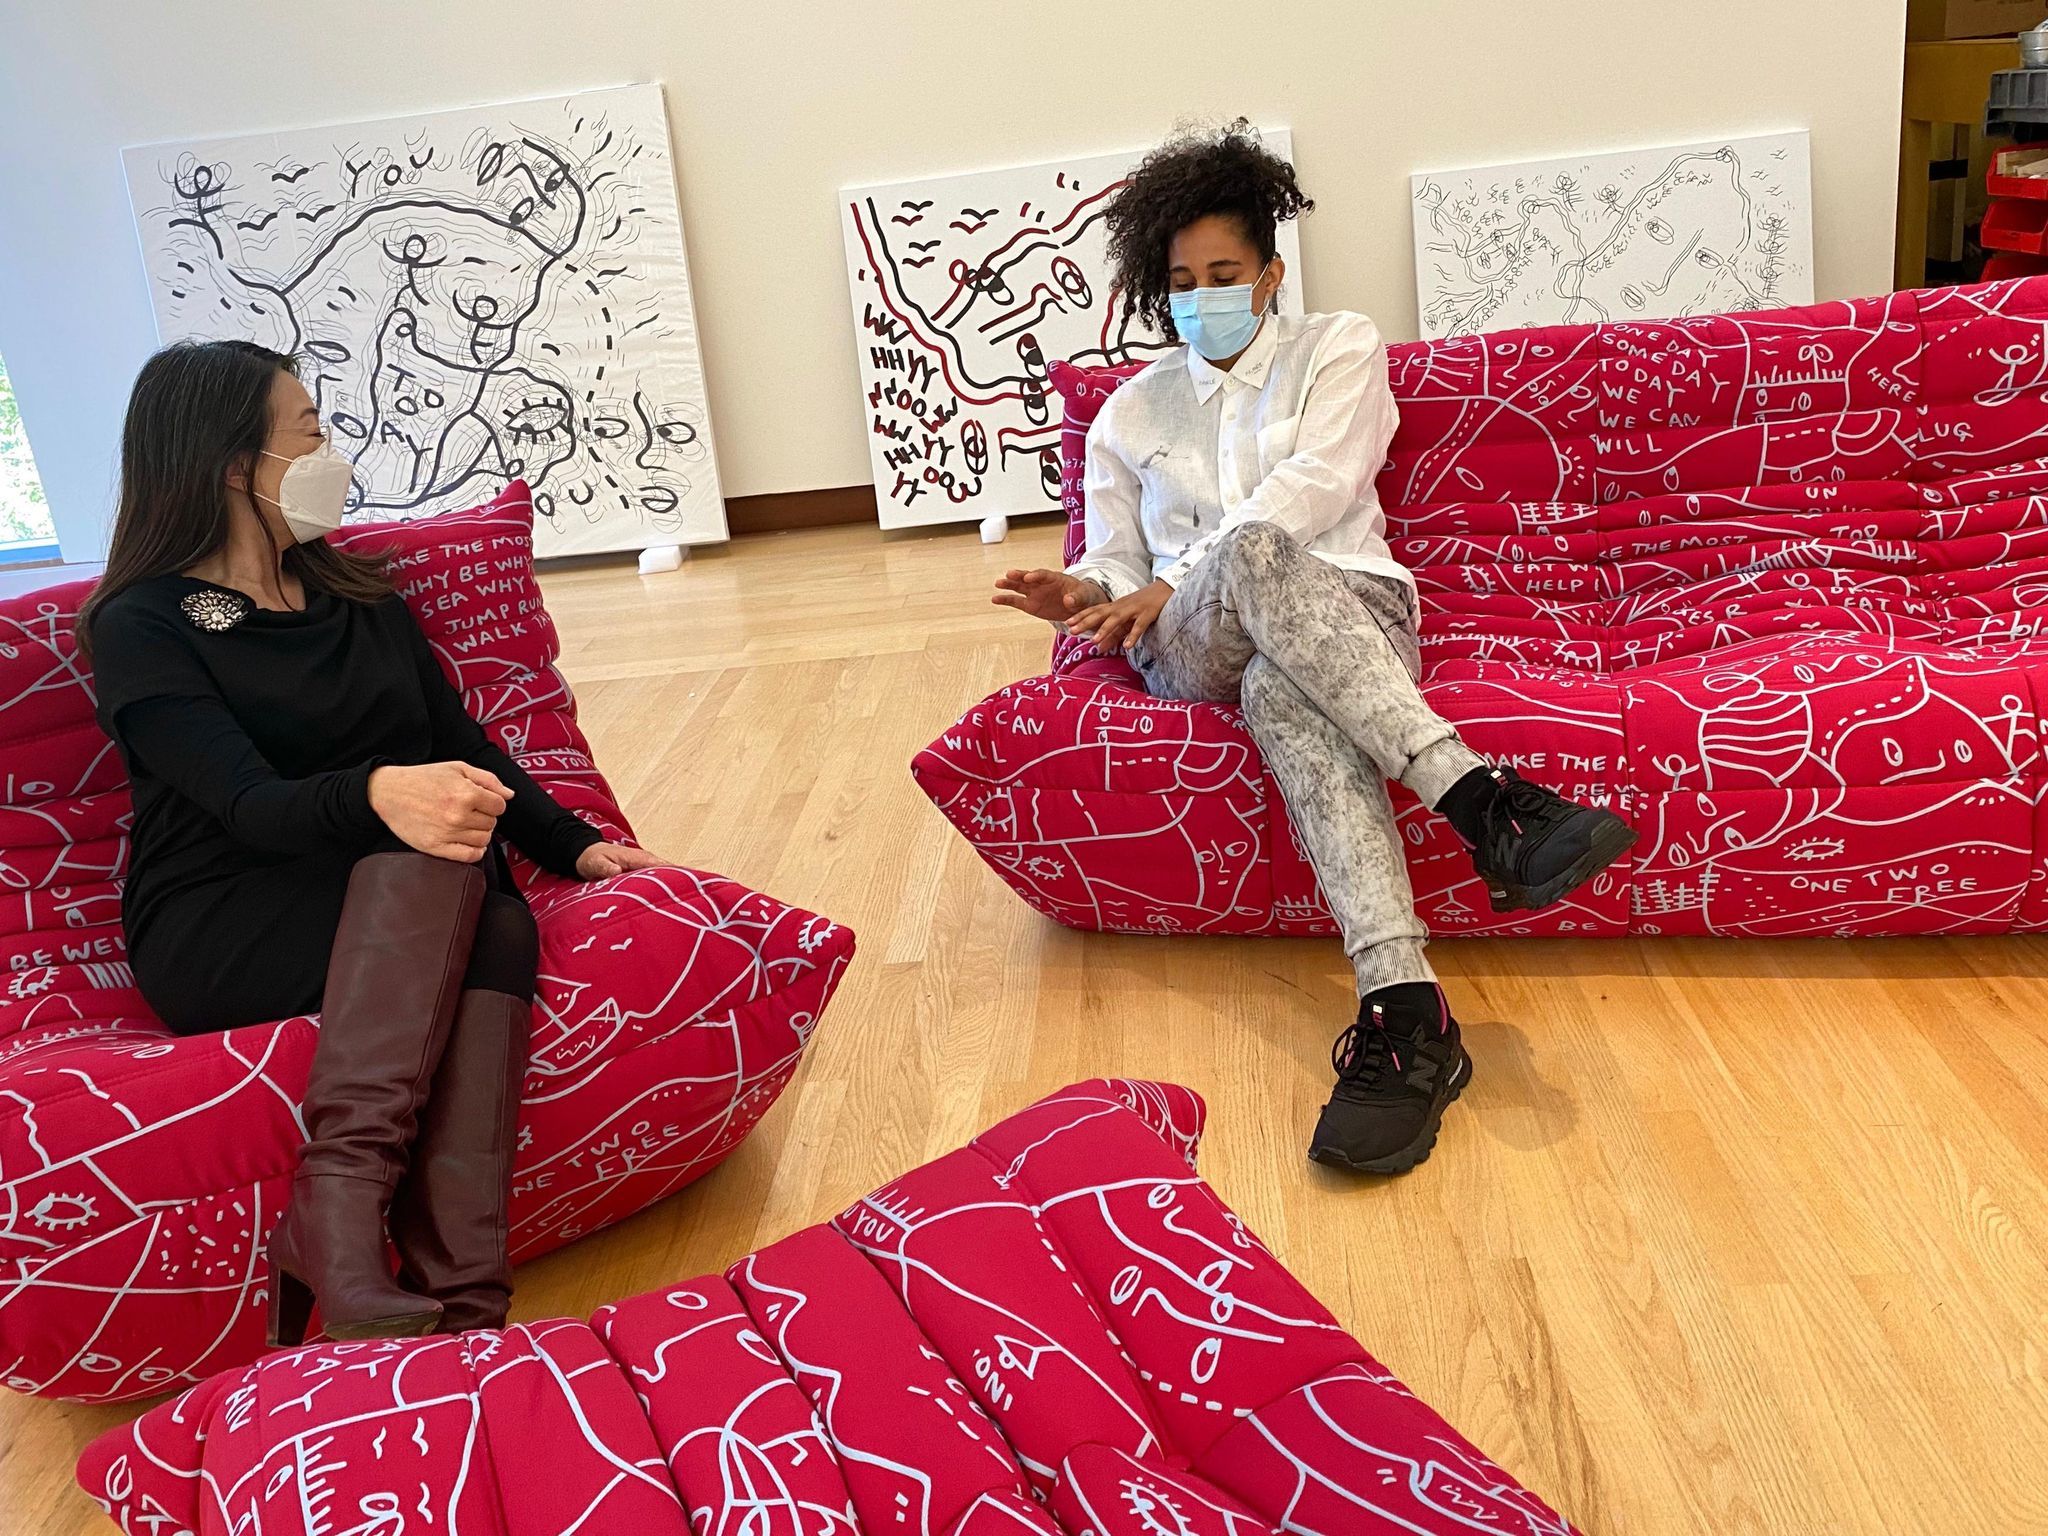 Pictured: Shantell Martin with NBMAA Director & CEO Min Jung Kim